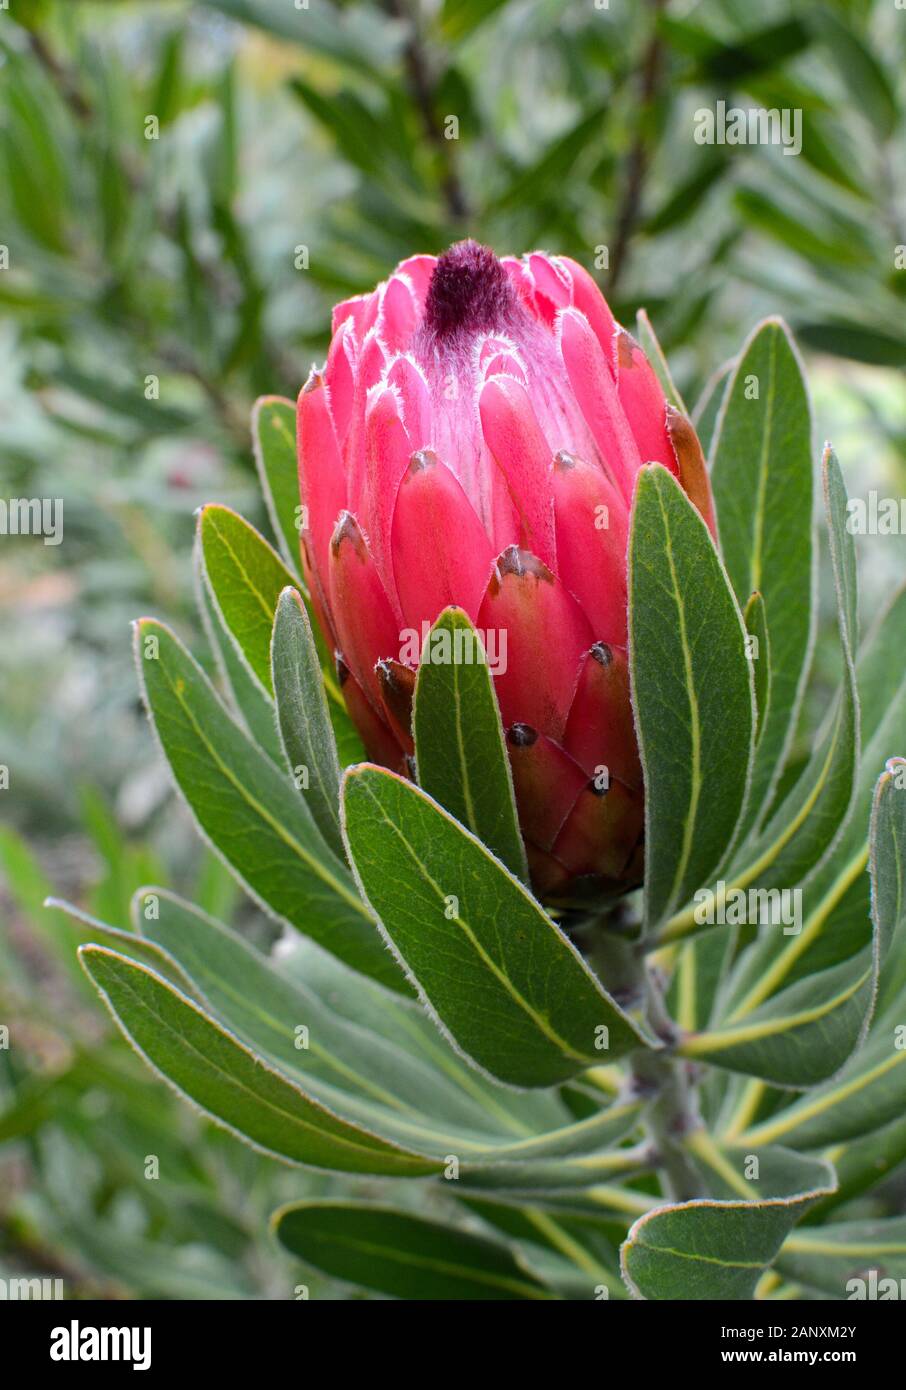 Beautiful pink and red protea flower bud just beginning to open Stock Photo